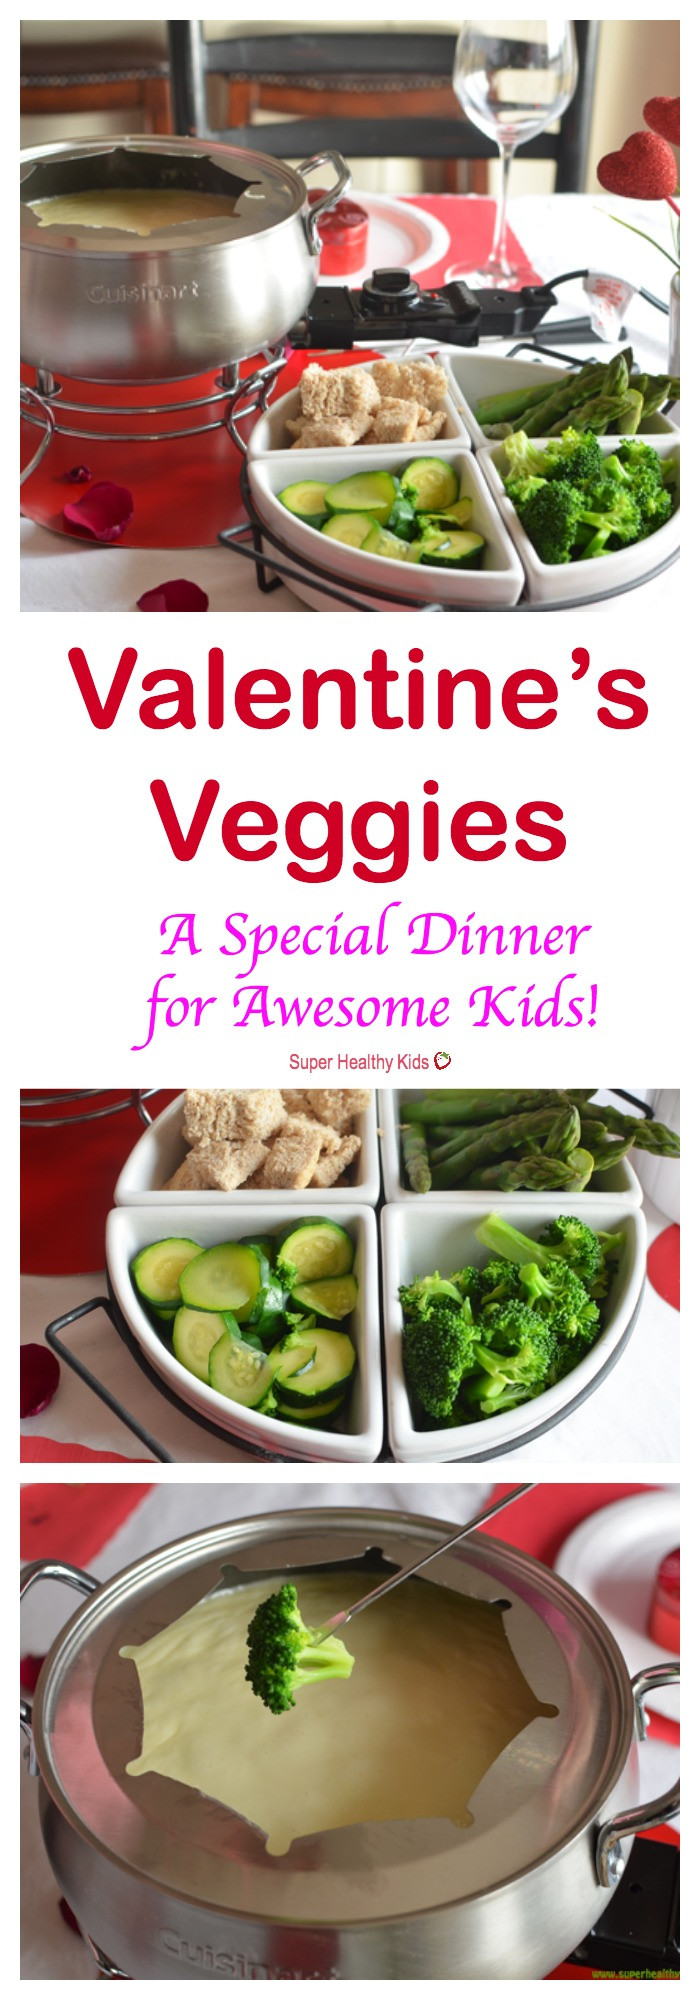 Valentine Dinners For Kids
 Valentine s Veggies Special Dinner for Awesome Kids